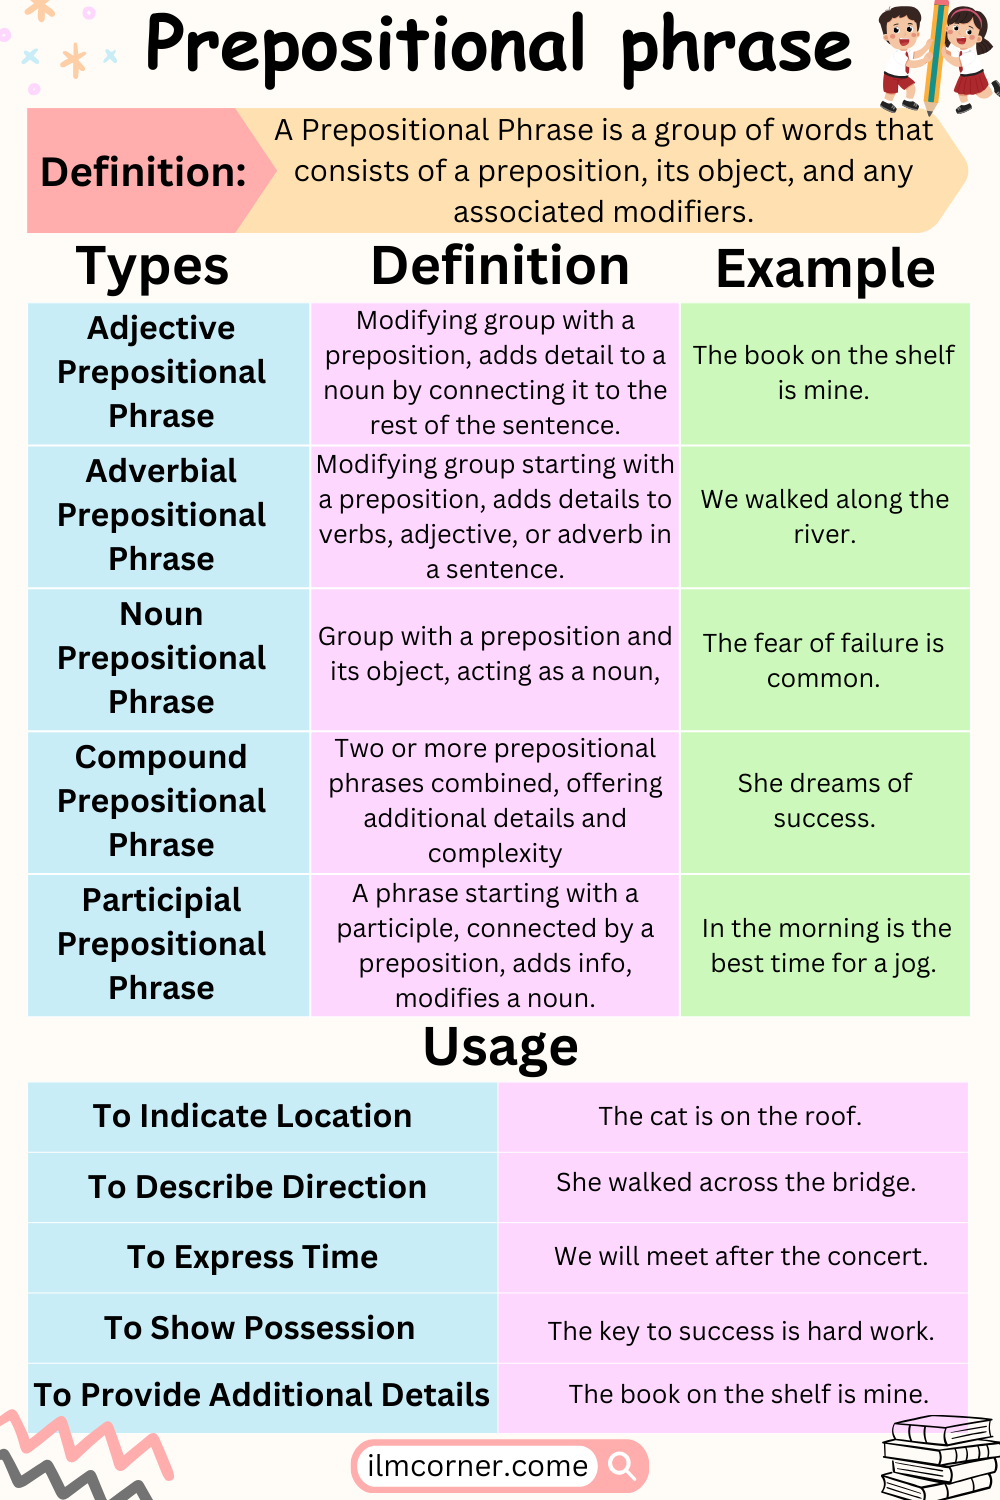 Prepositional Phrase, Definition, Usage and Examples